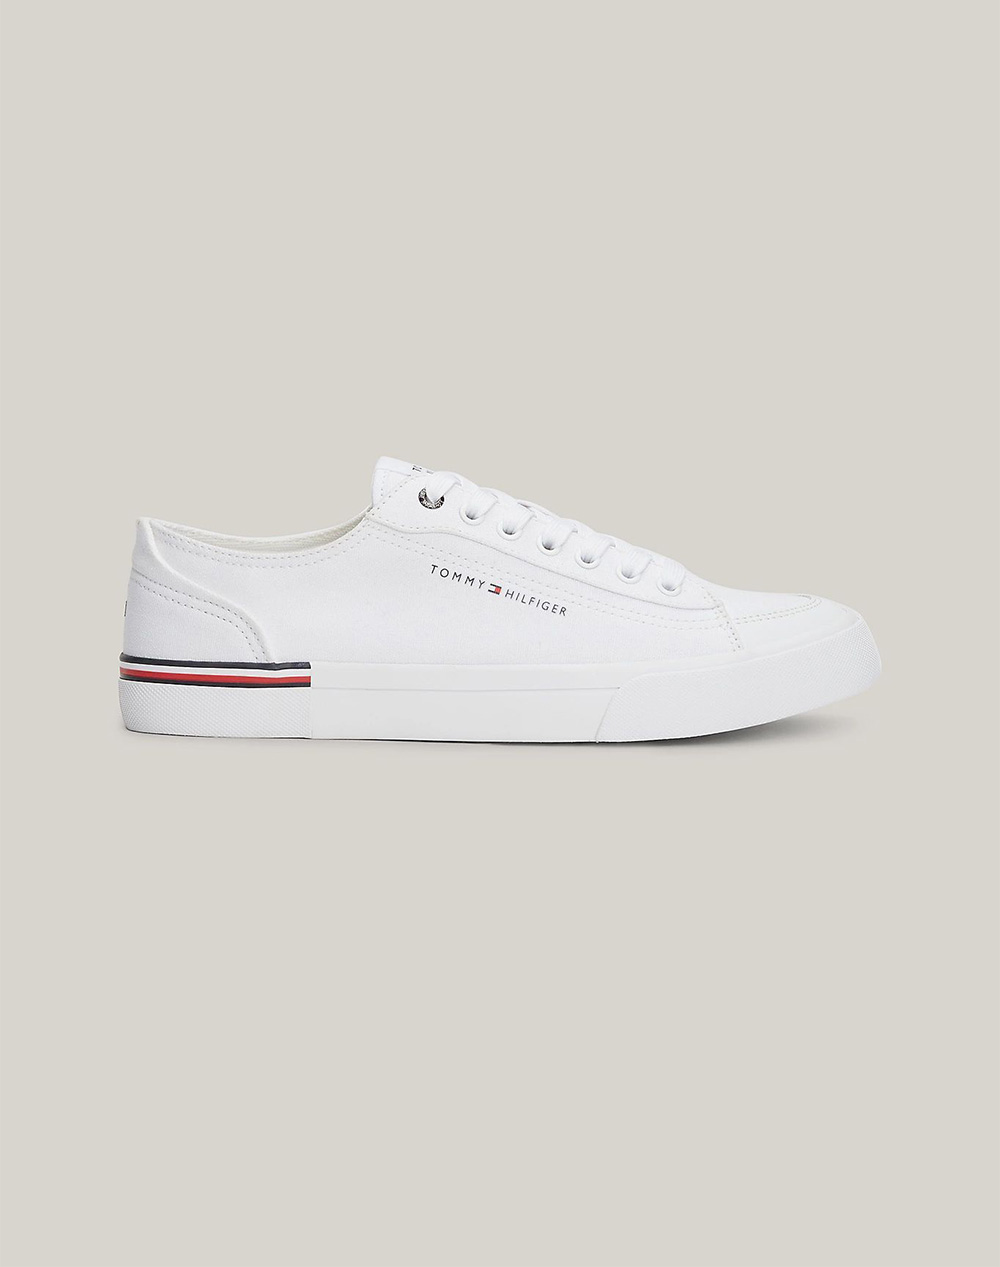 TOMMY HILFIGER CORPORATE VULC CANVAS FM0FM04954-YBS White